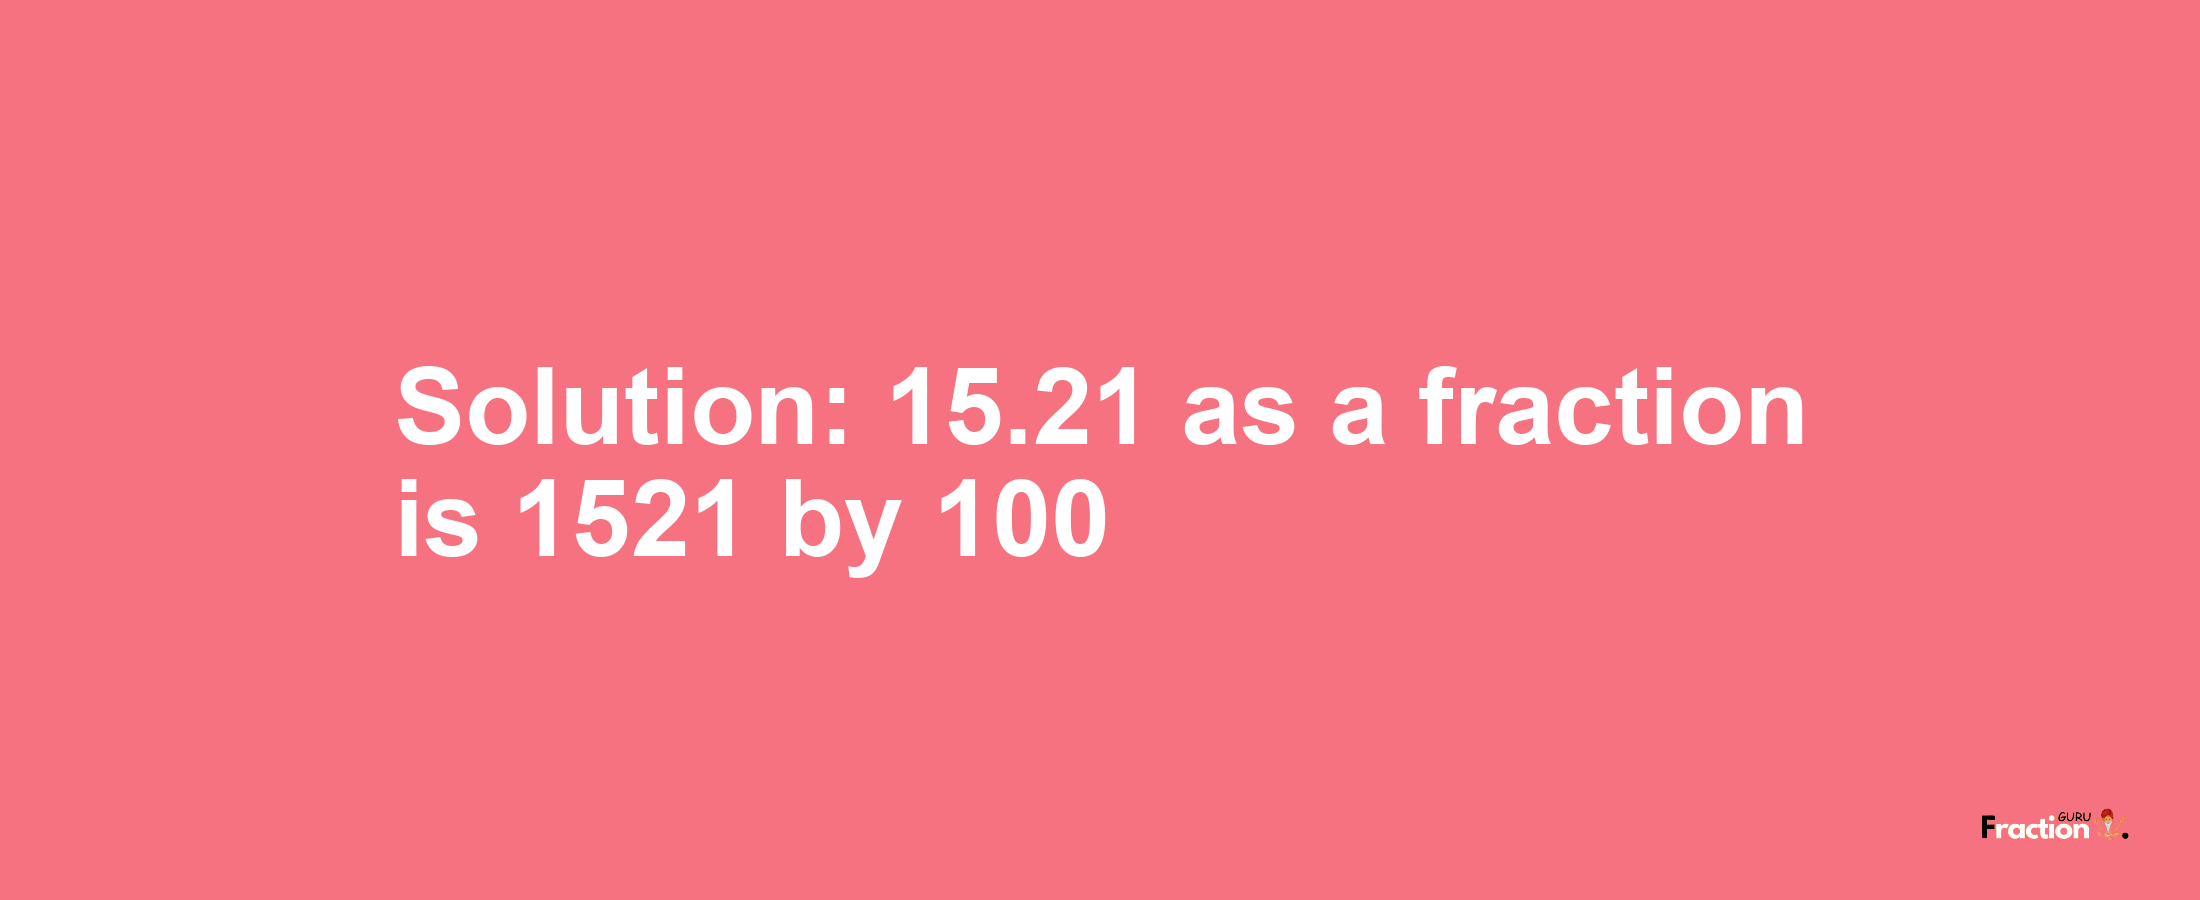 Solution:15.21 as a fraction is 1521/100